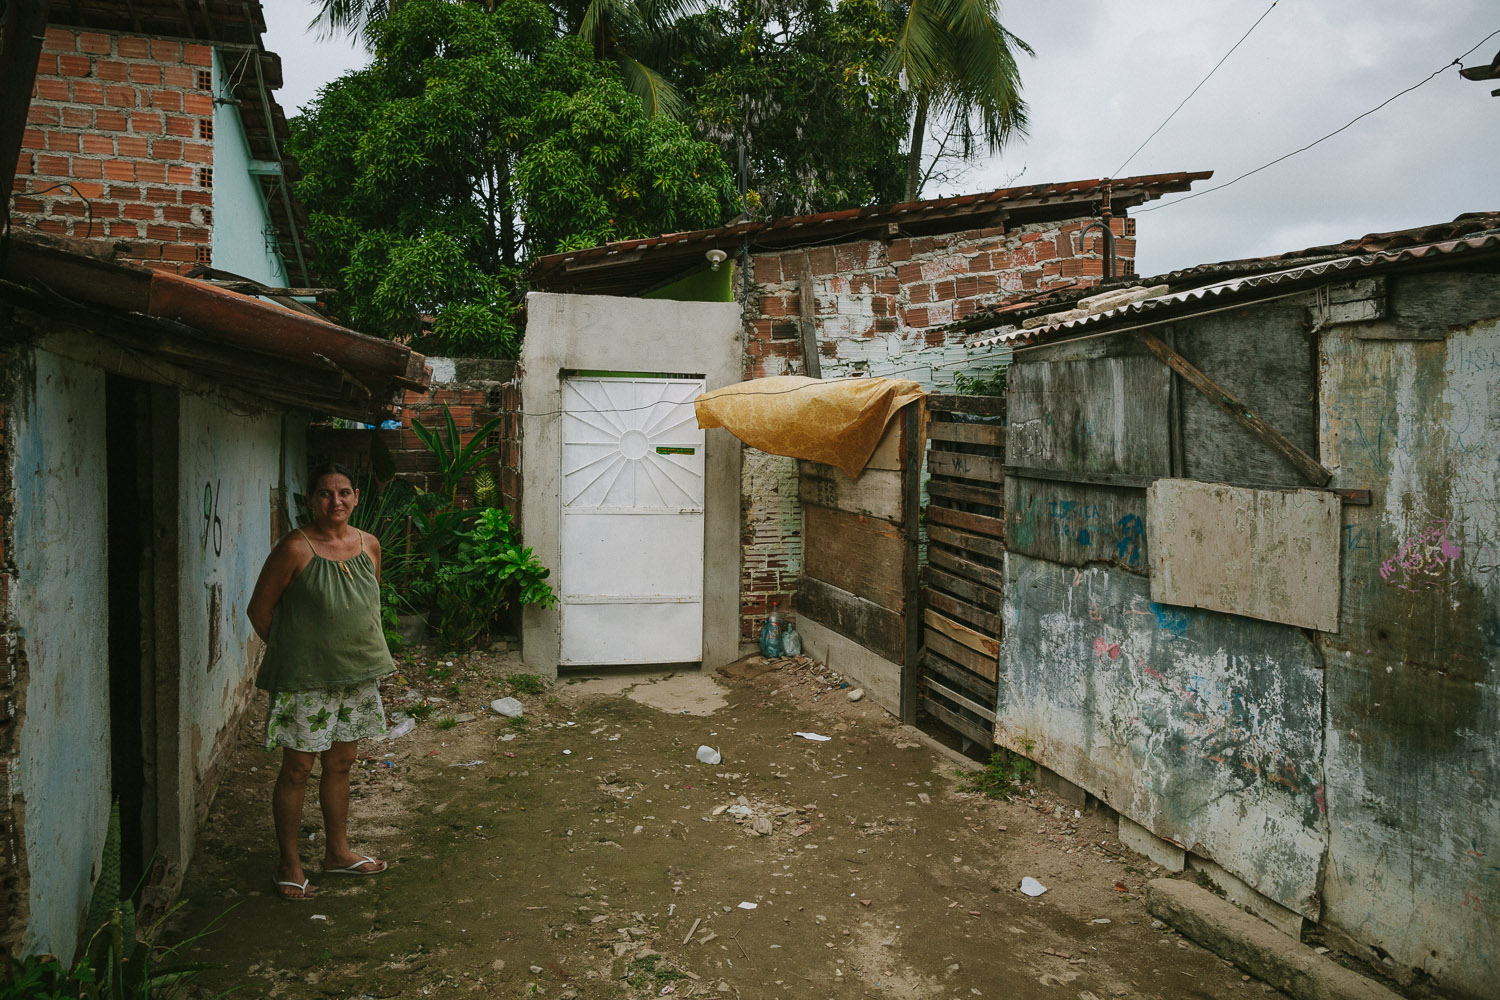   The neighborhood where Emidio lives is a very very poor section of the city with substantial poverty and high crime rate. Many of the houses are nothing more than pieces of thin wood and tin. In spite of this, many friendly people live there and ar